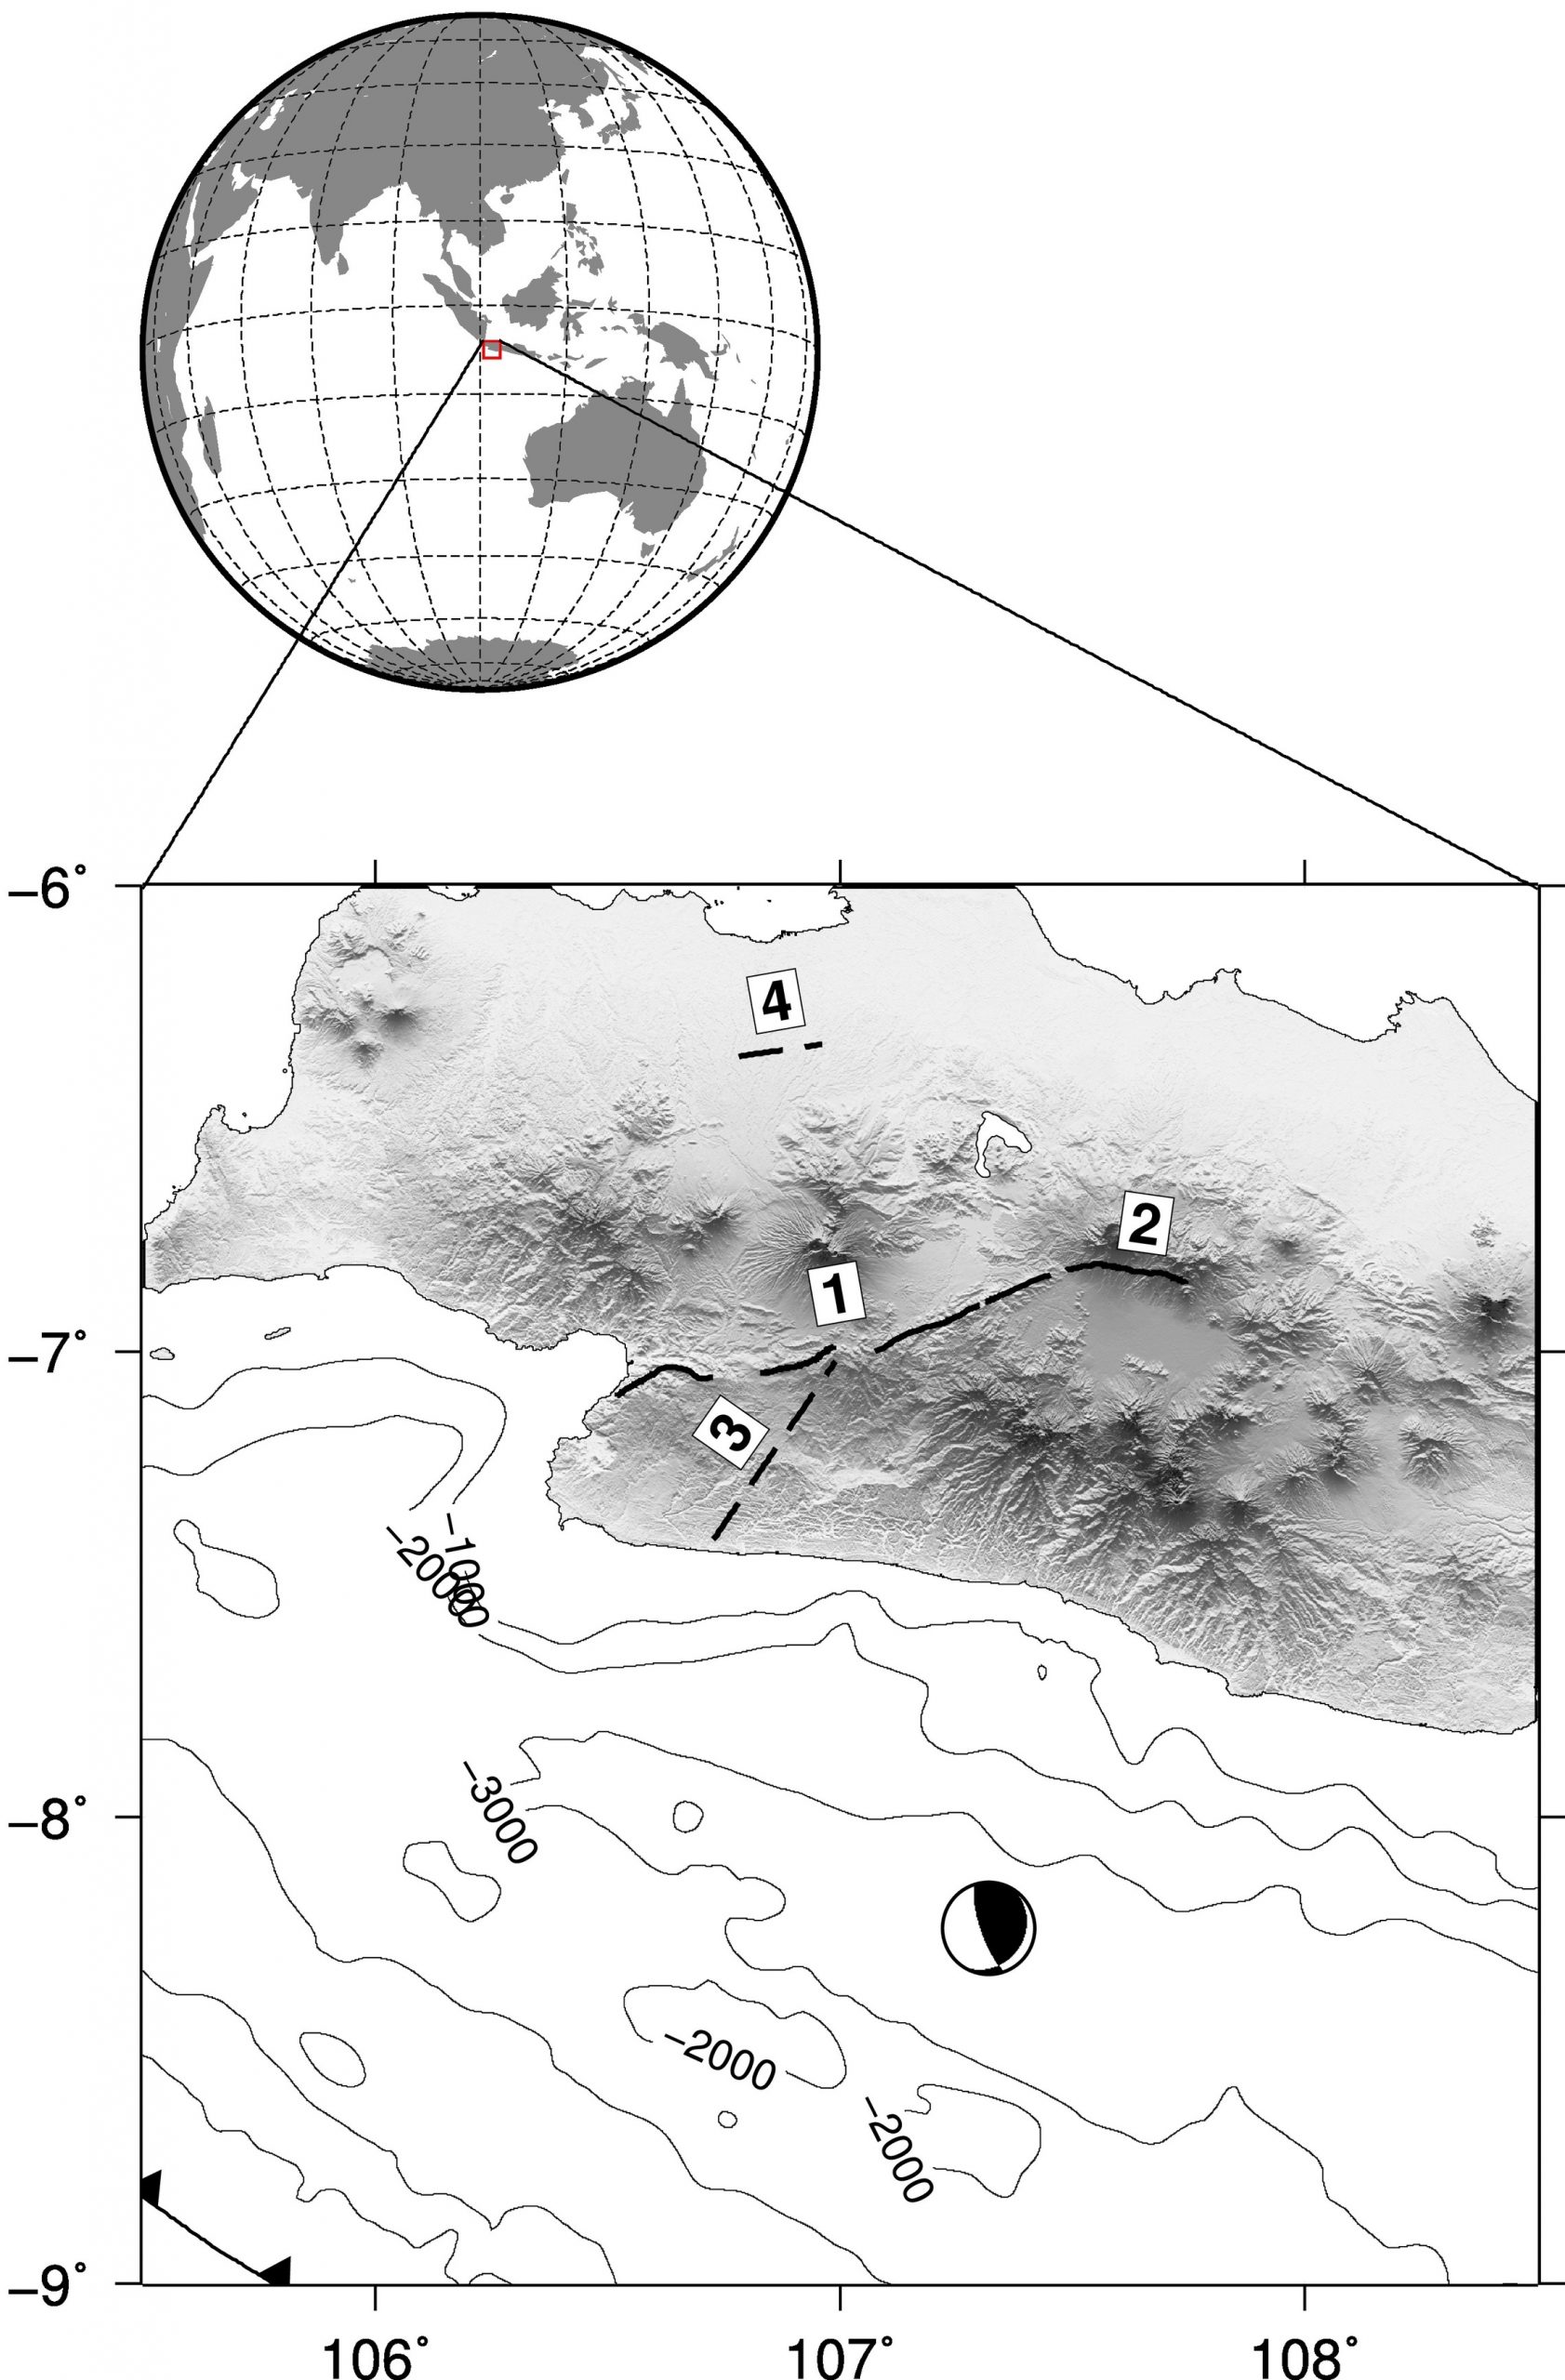 Fault source of the 2 September 2009 Mw 6.8 Tasikmalaya intraslab earthquake, Indonesia: Analysis from GPS data inversion, tsunami height simulation, and stress transfer